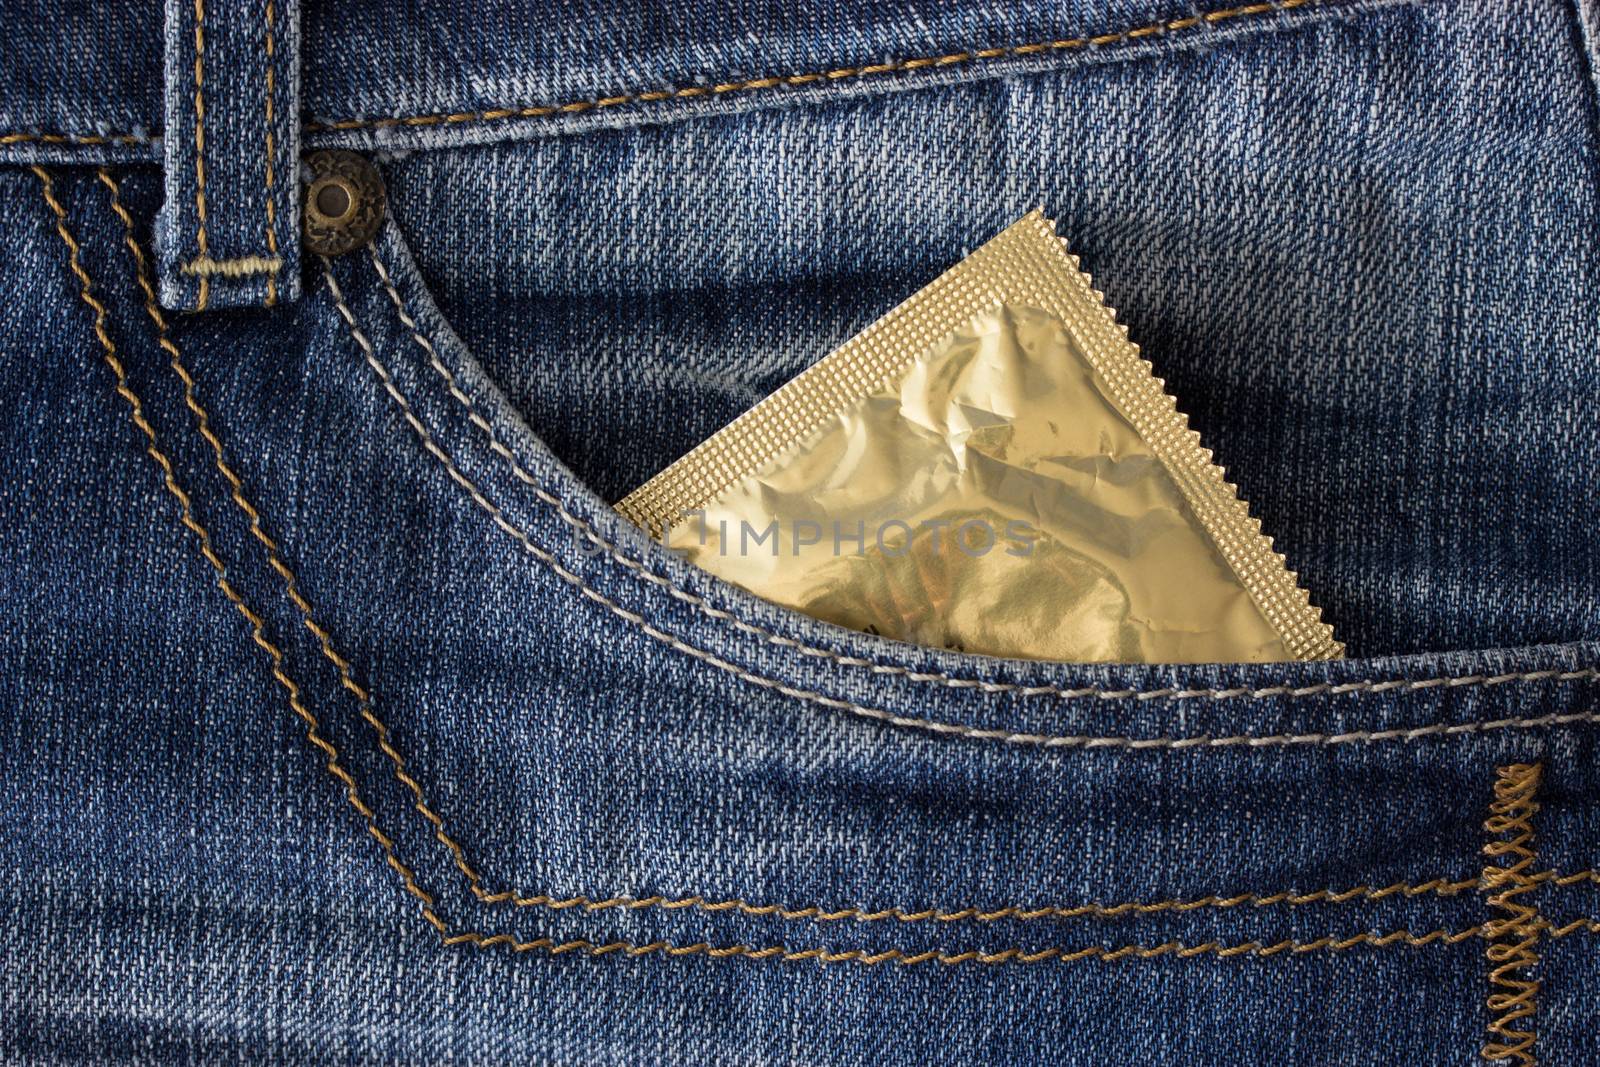 condom in a pocket of blue jeans